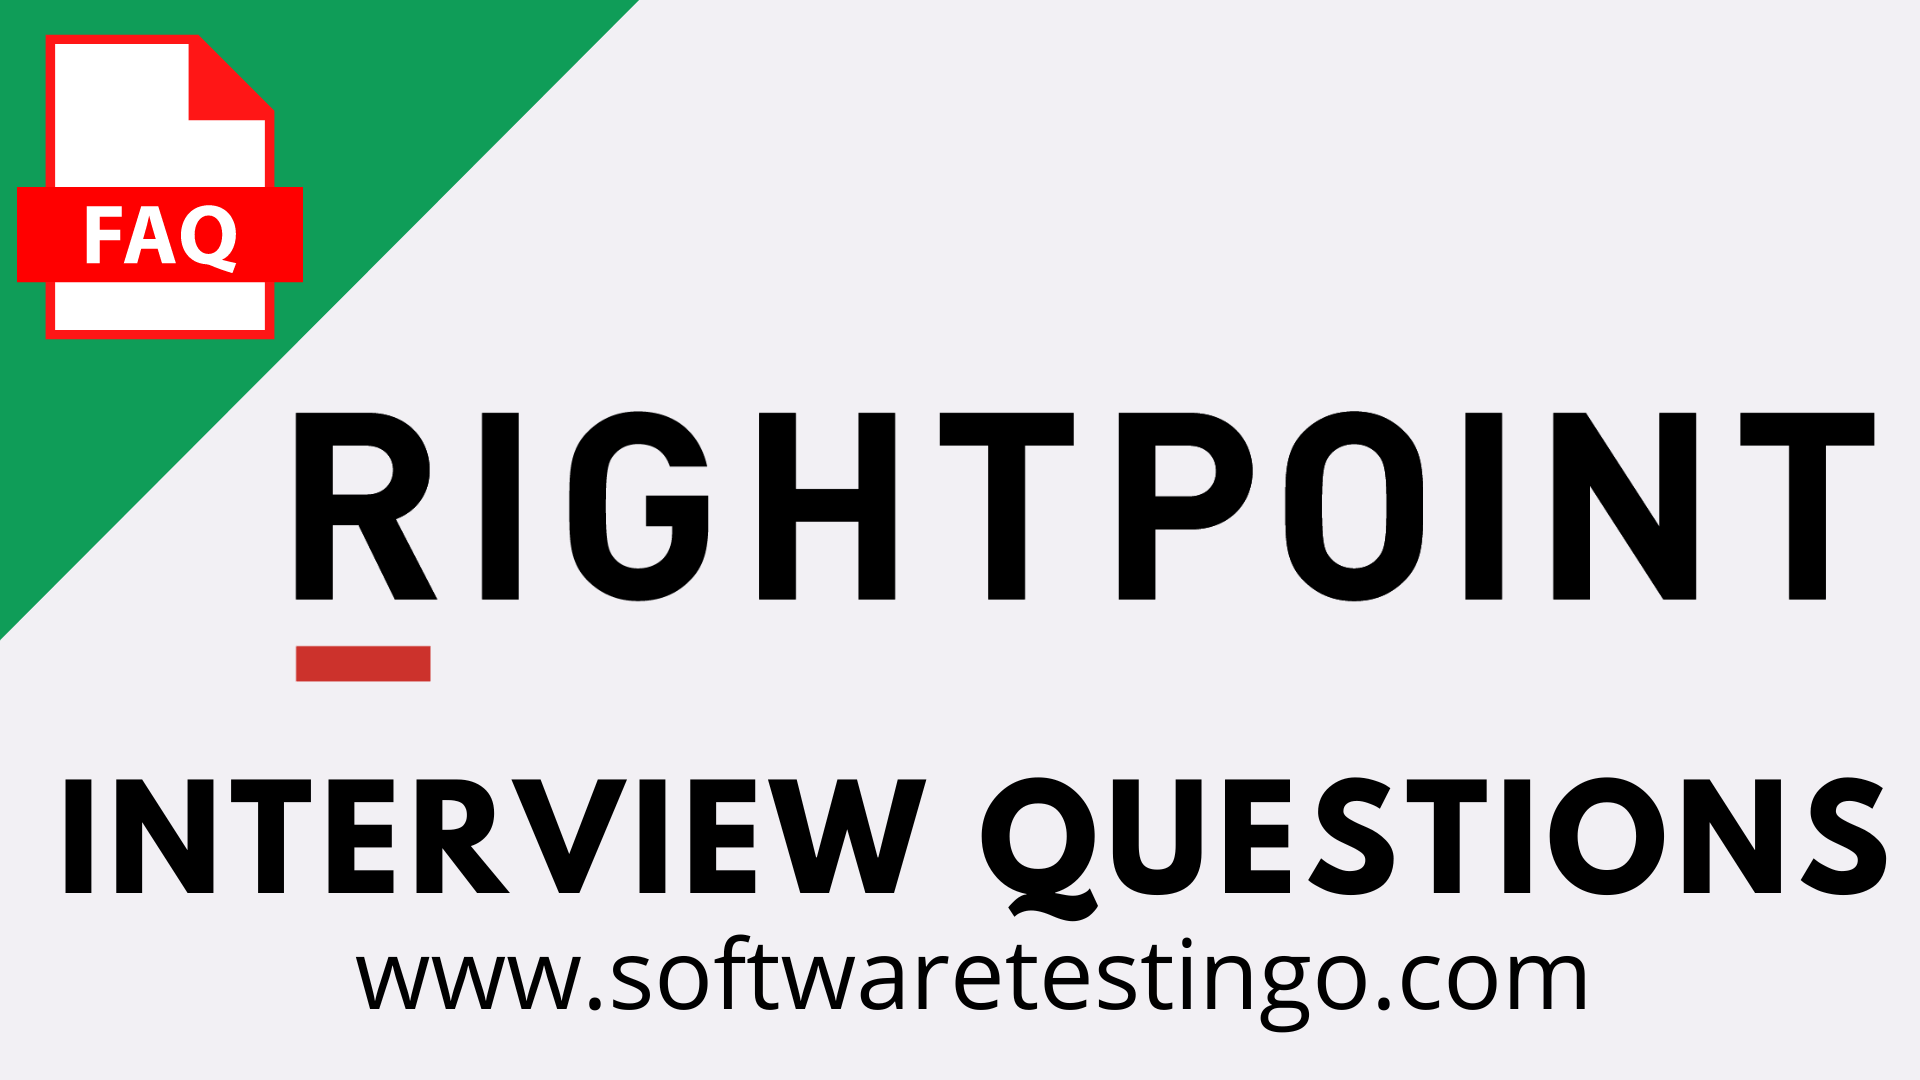 Rightpoint Interview Questions